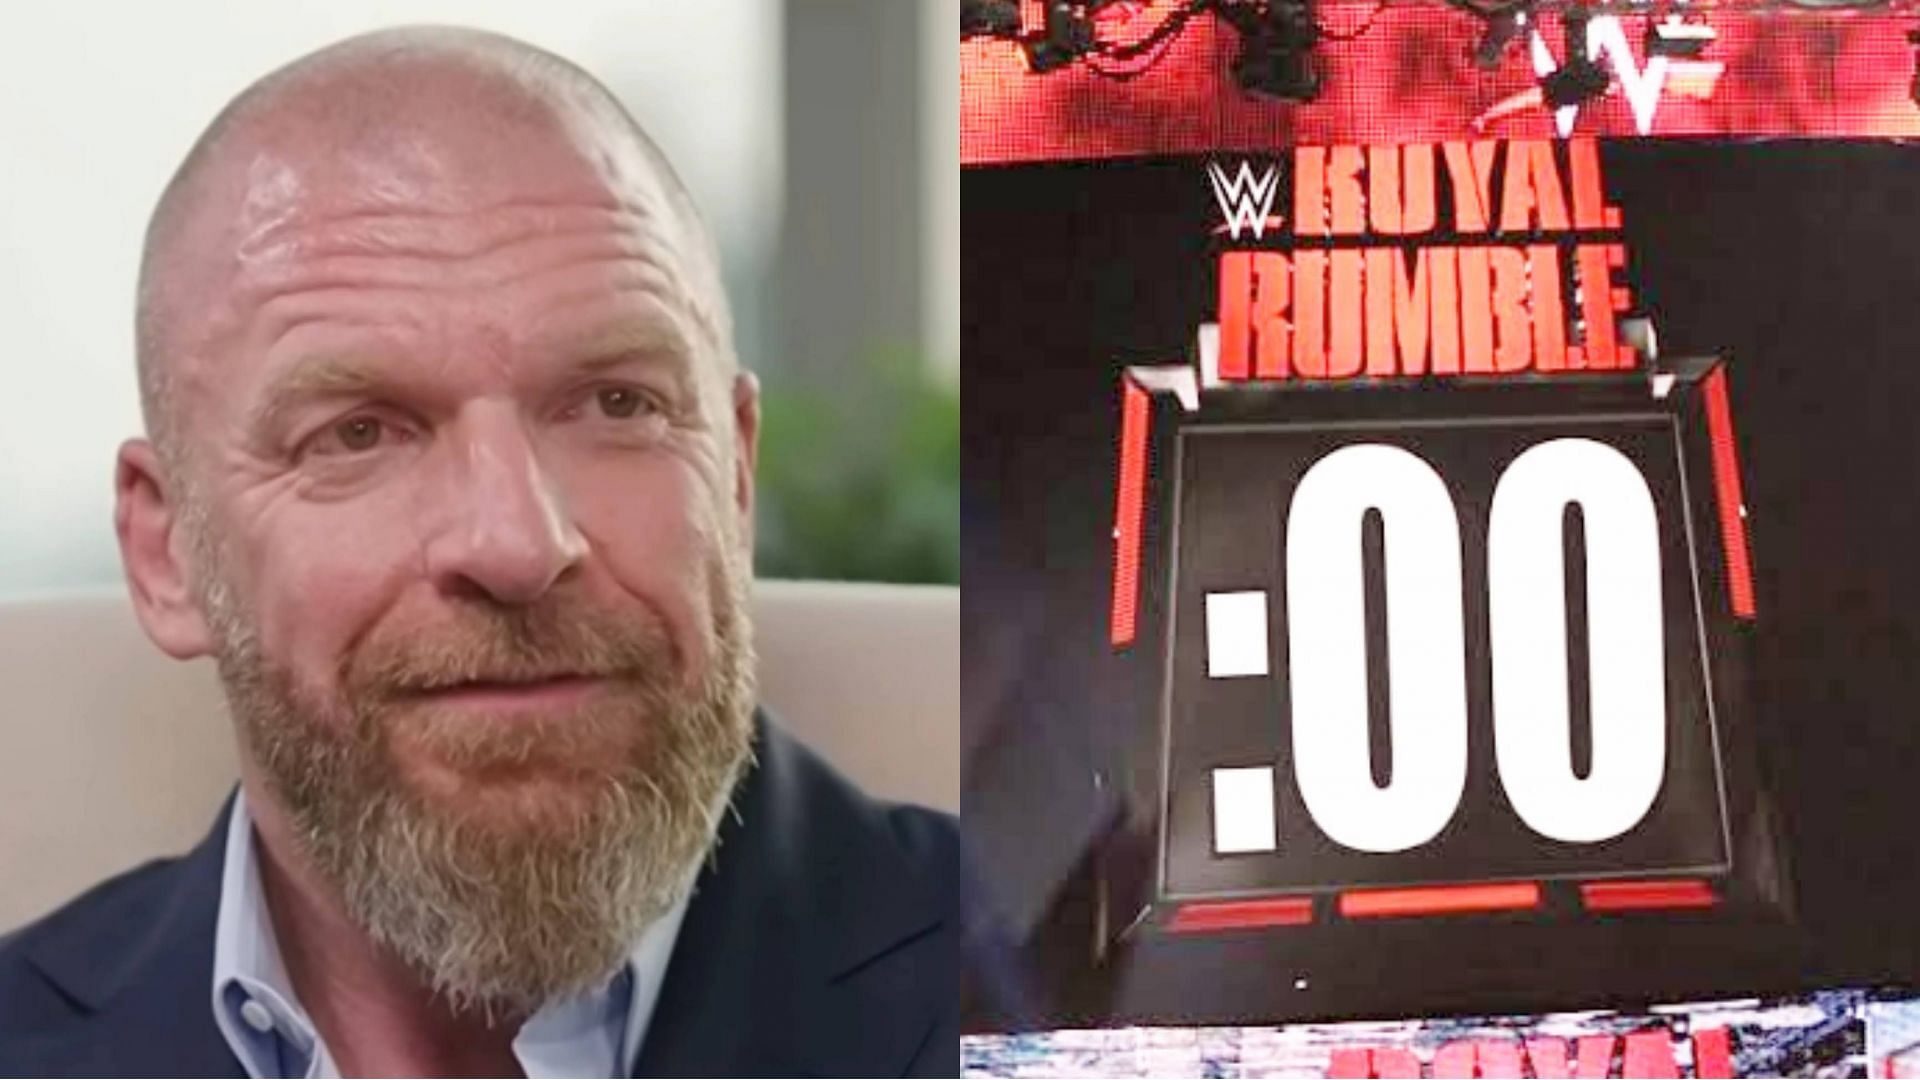 WWE Chief Content Officer Triple H is in charge of overseeing the creative department